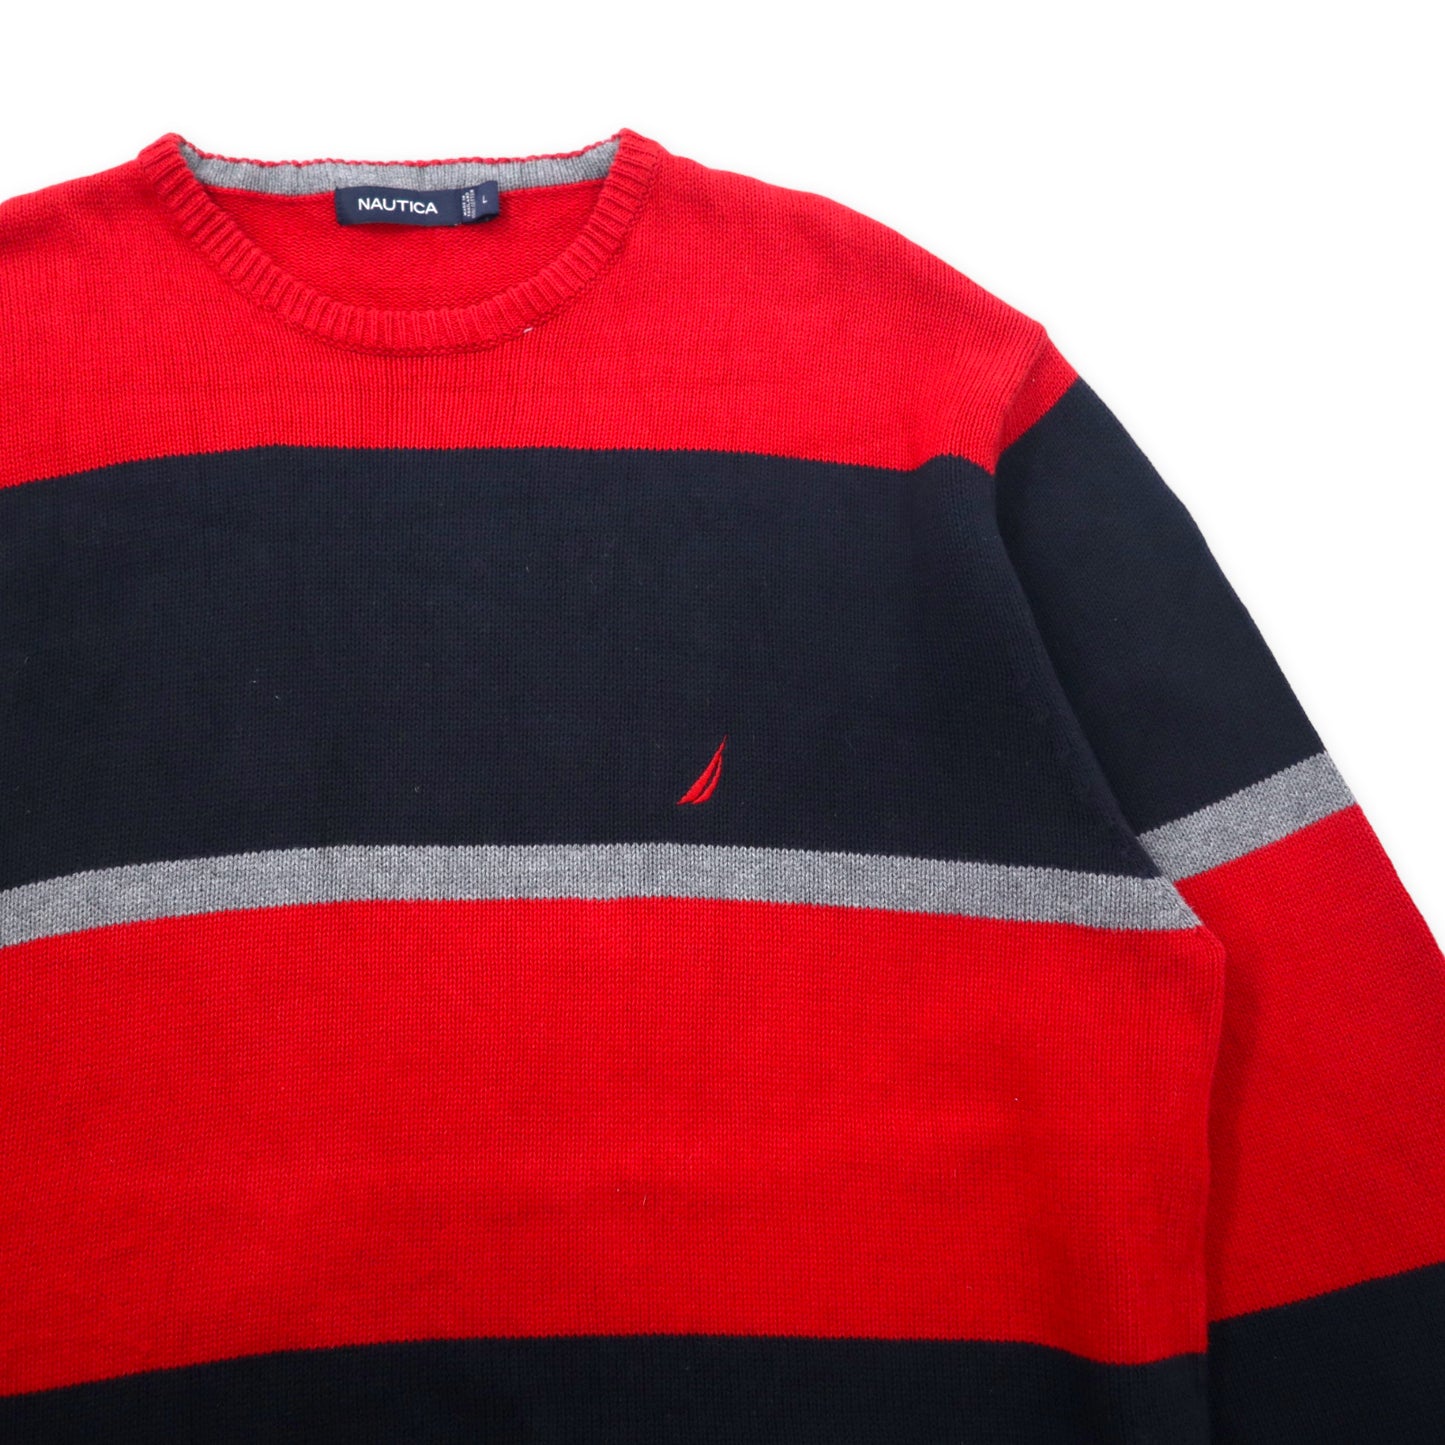 NAUTICA cotton knit sweater L Red Striped Low Gauge One Point Logo